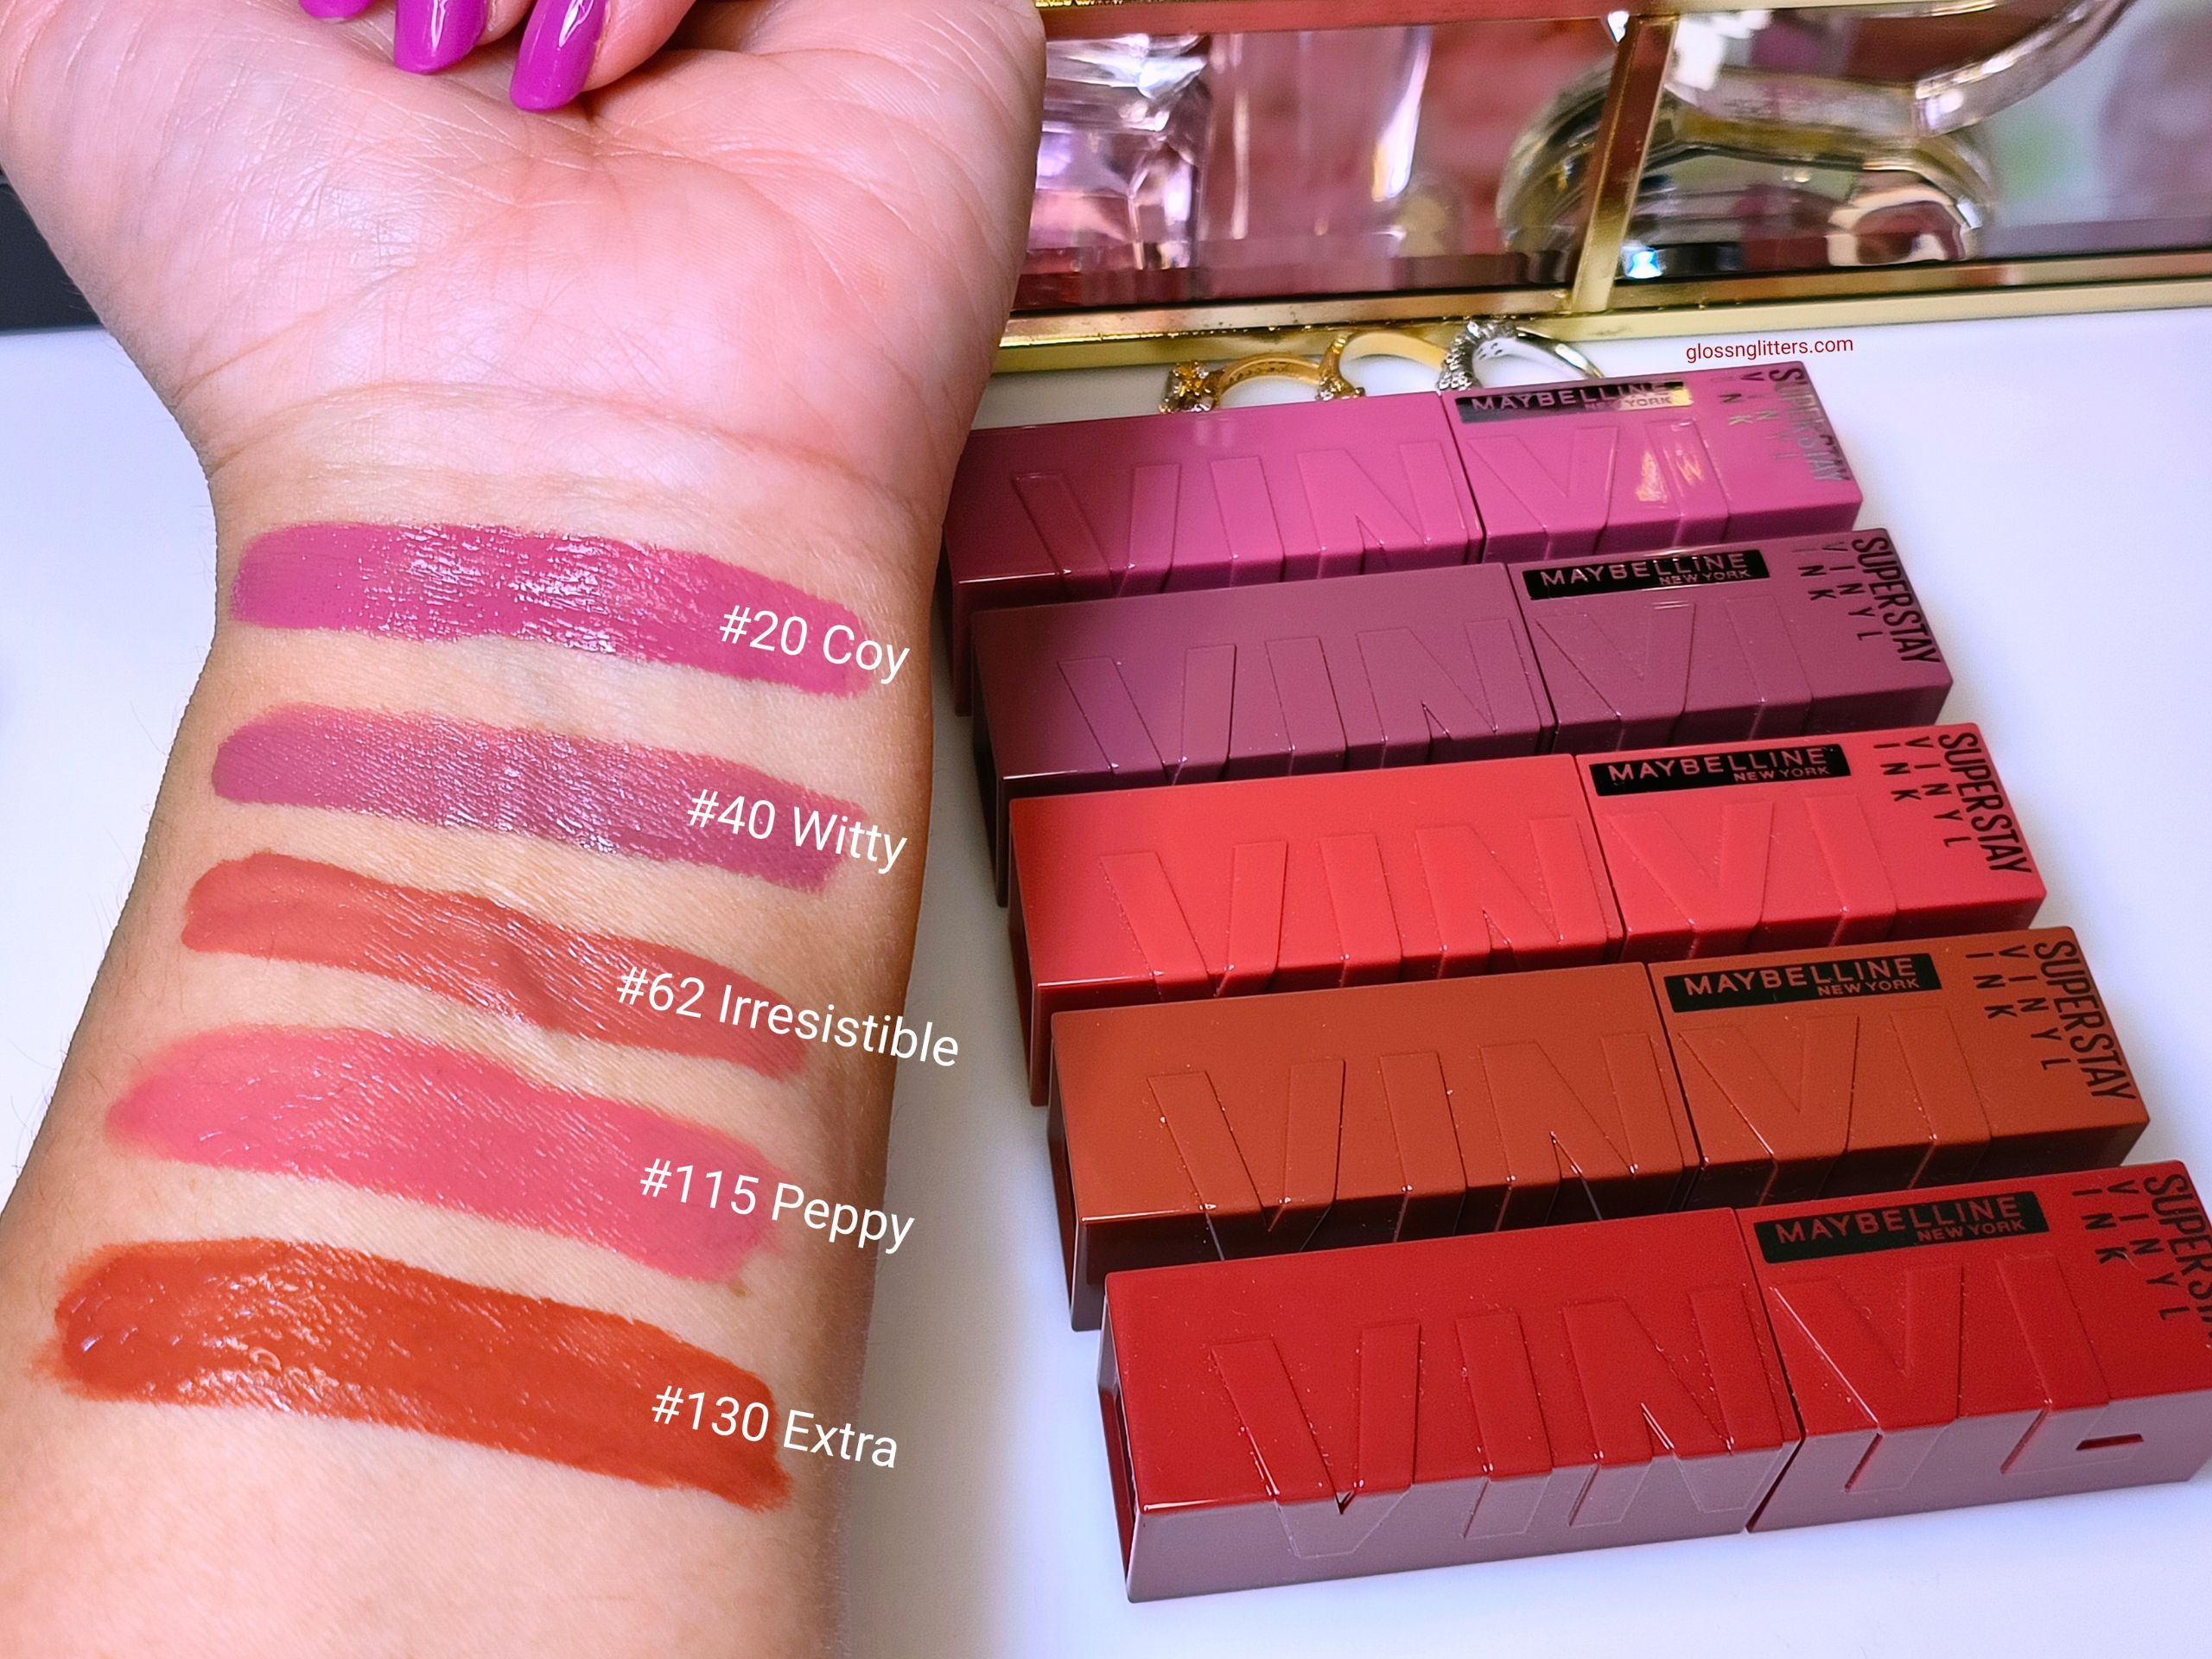 Maybelline Super Stay Vinyl Ink Liquid Lipcolor Swatches